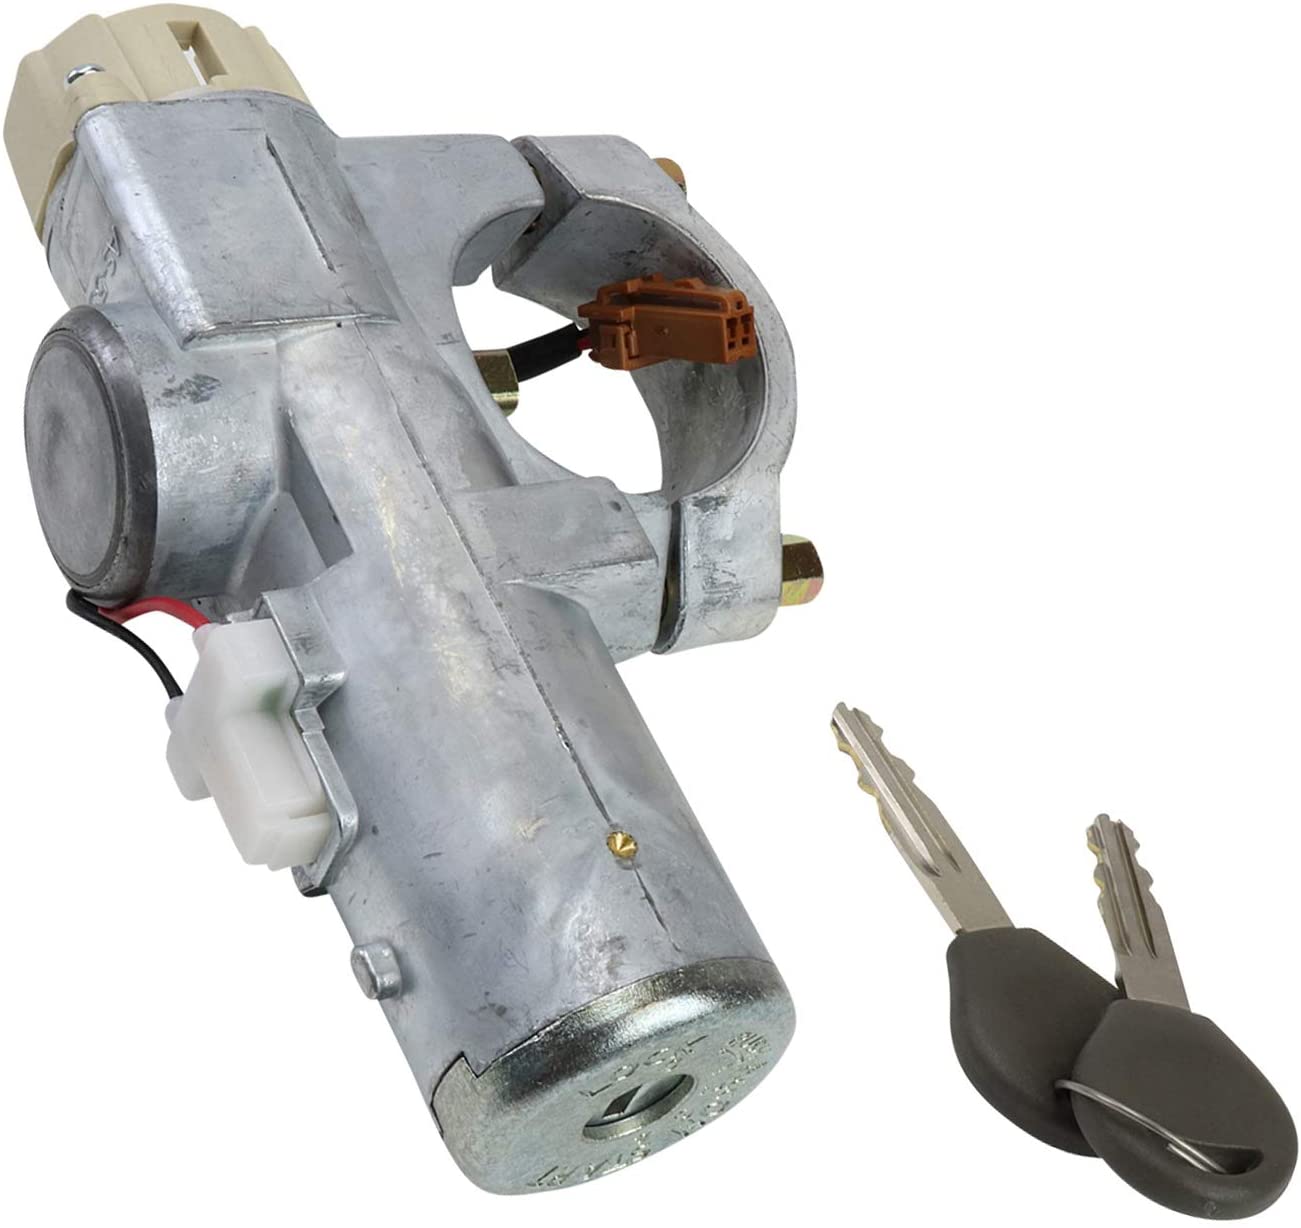 Beck Arnley 201-1926 Ignition Lock Assembly